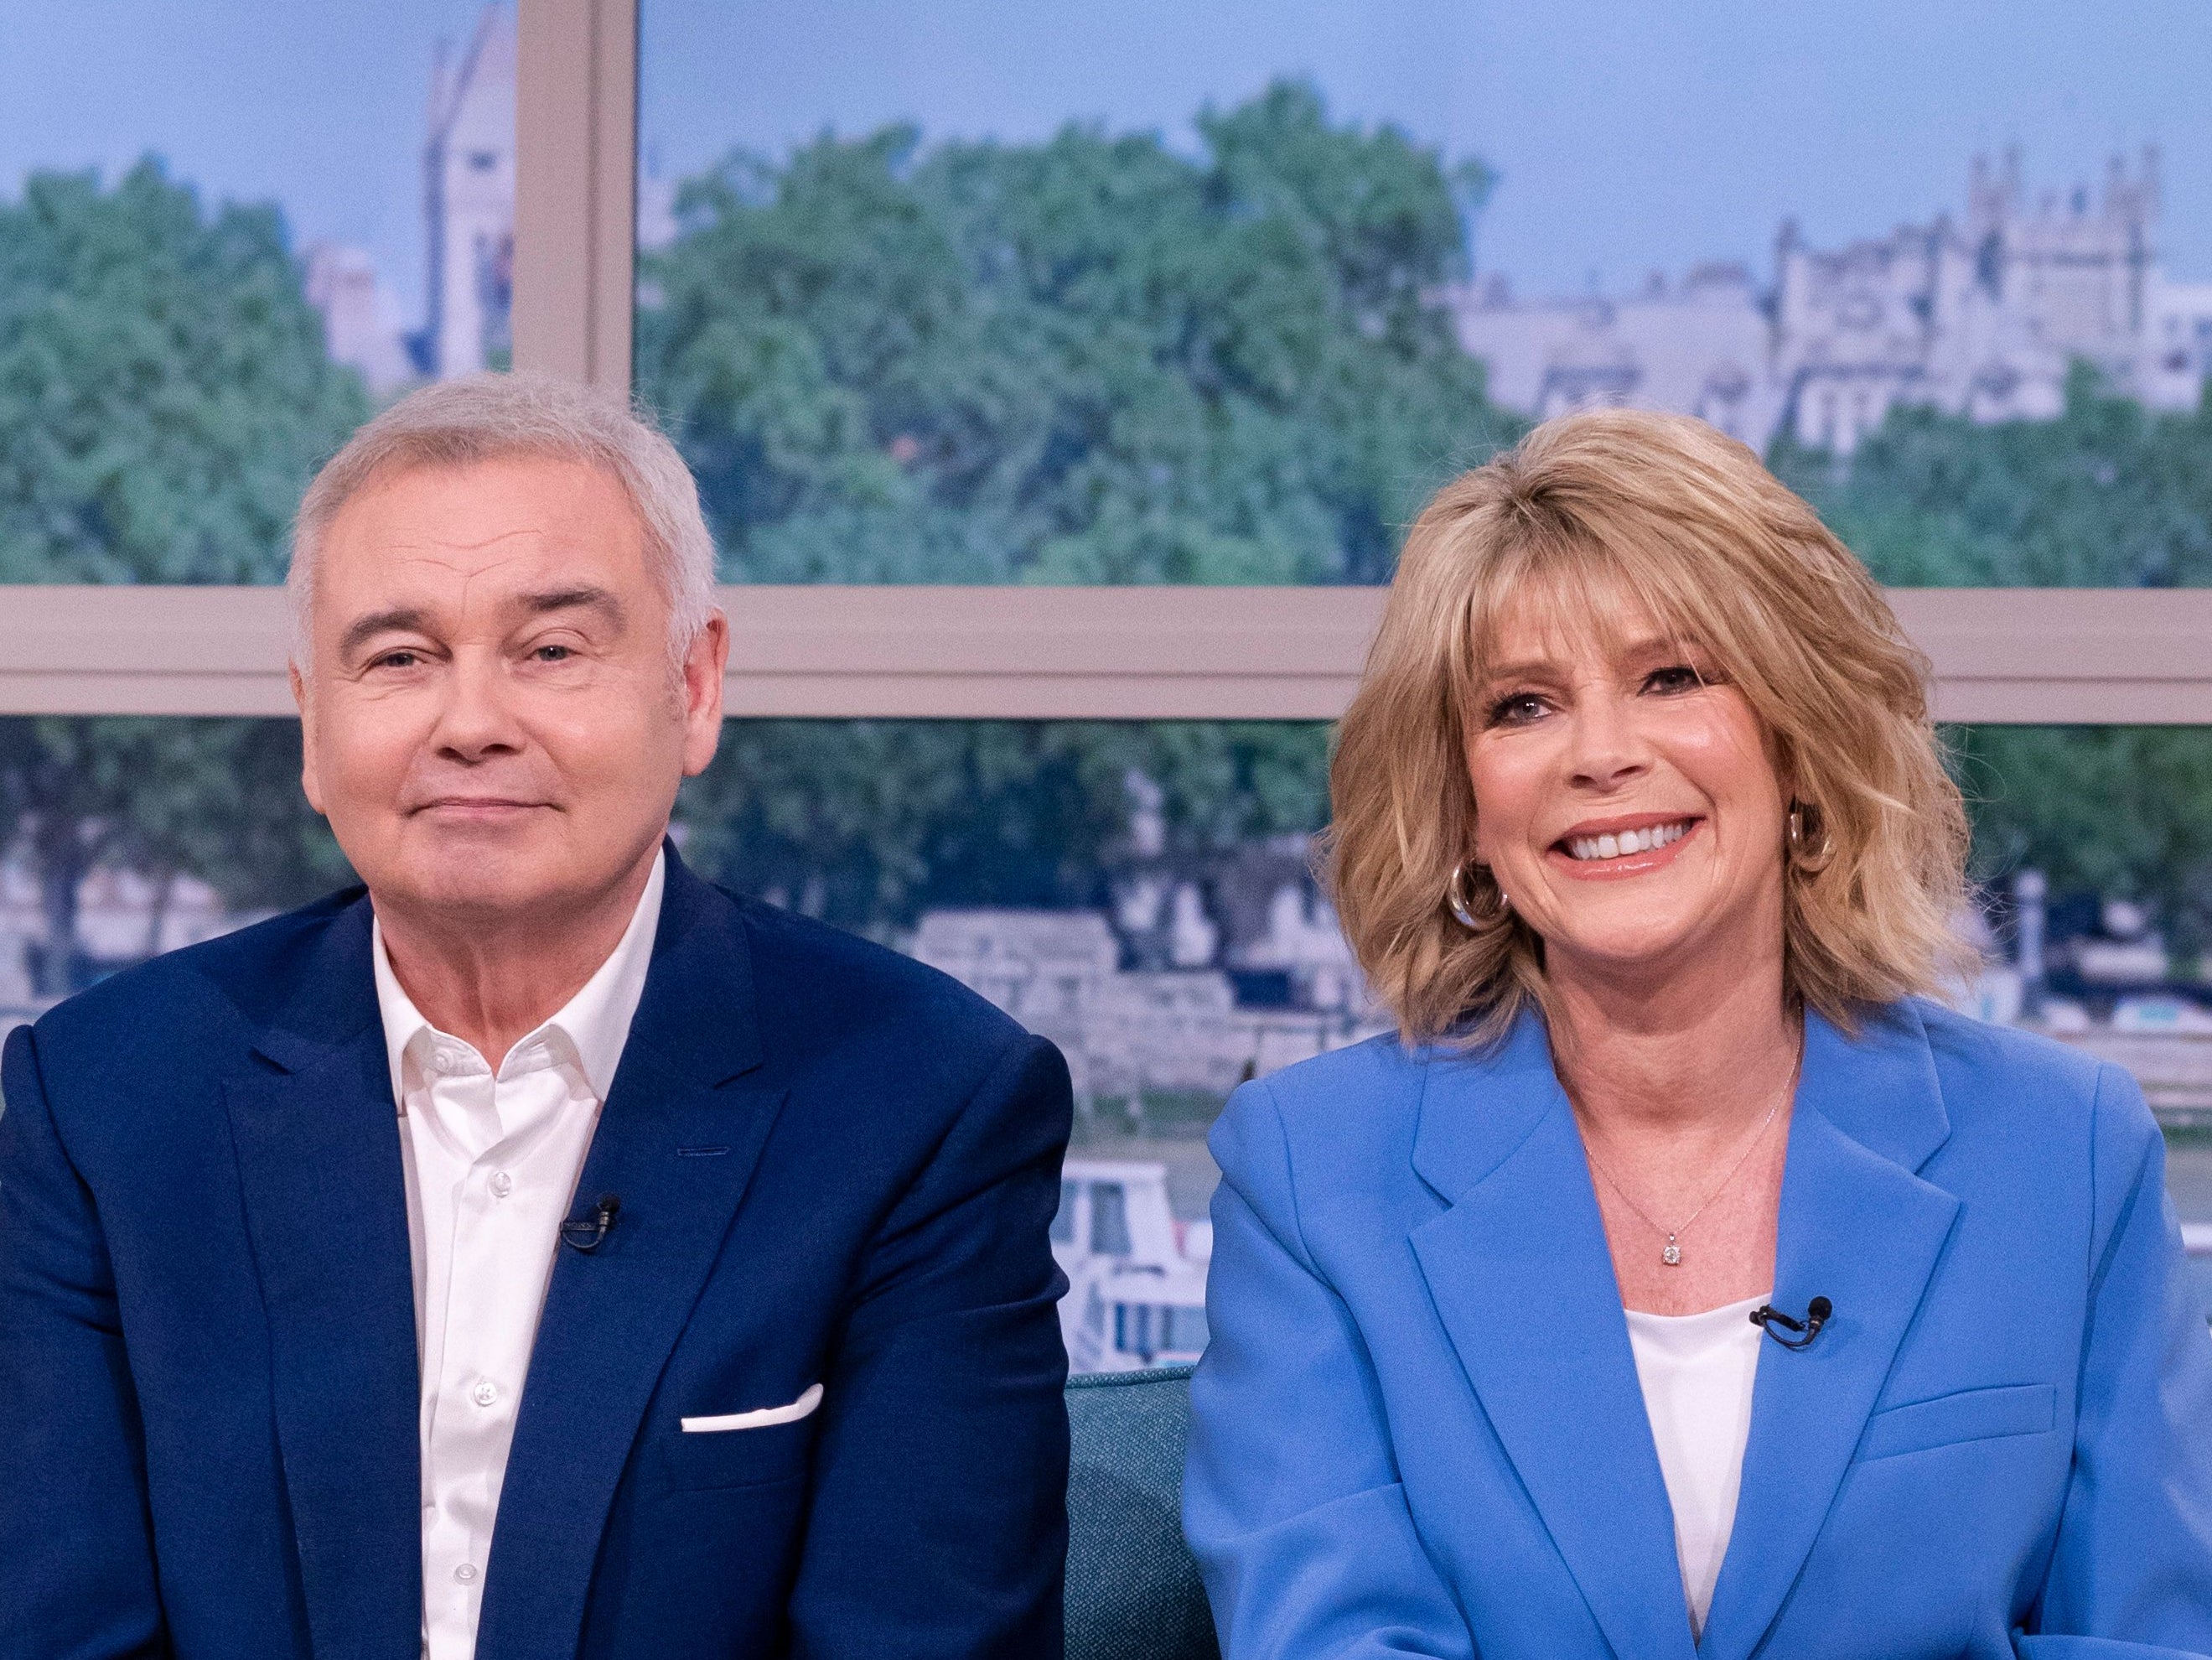 TV presenters Ruth Langsford and Eamonn Holmes have announced their divorce after 14 years of marriage